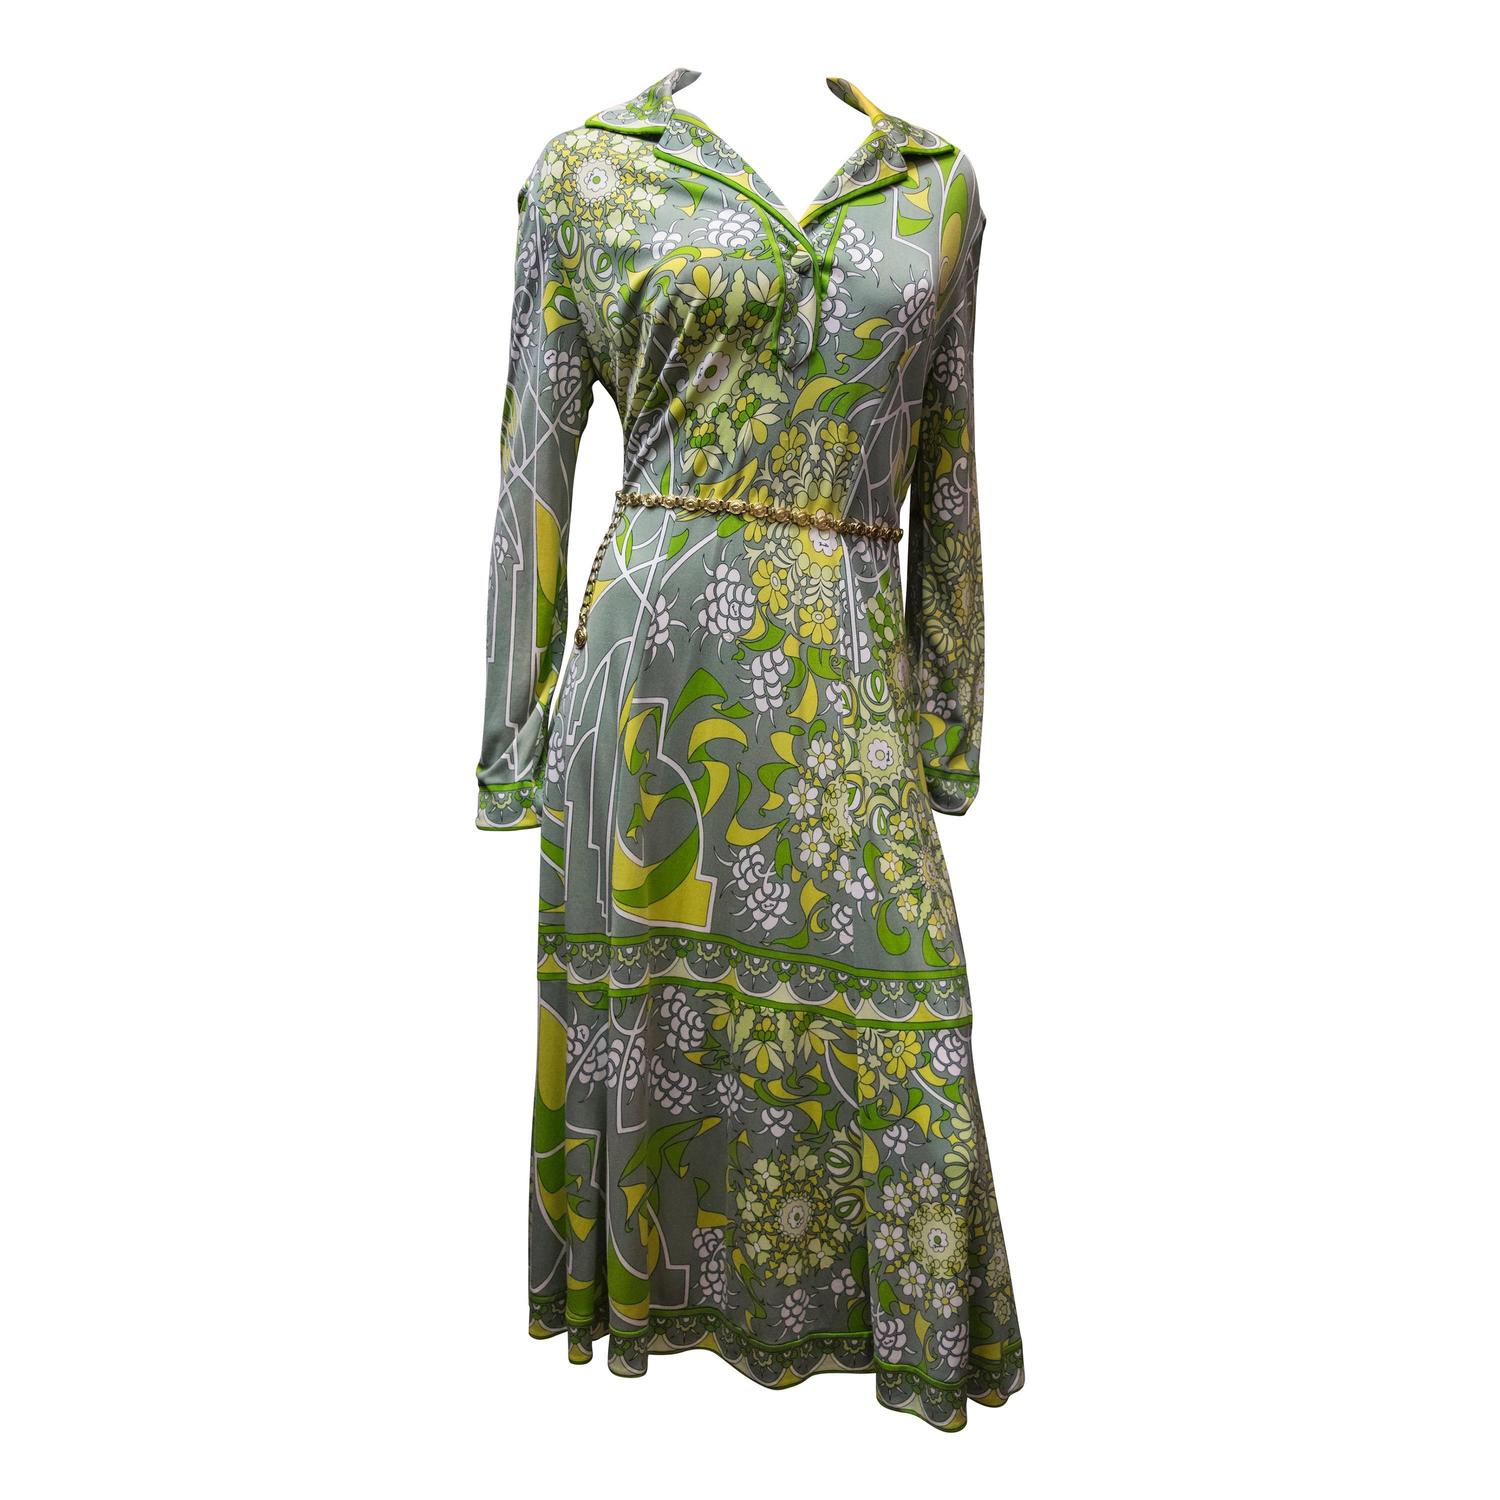 1960s Pucci Dress For Sale at 1stdibs